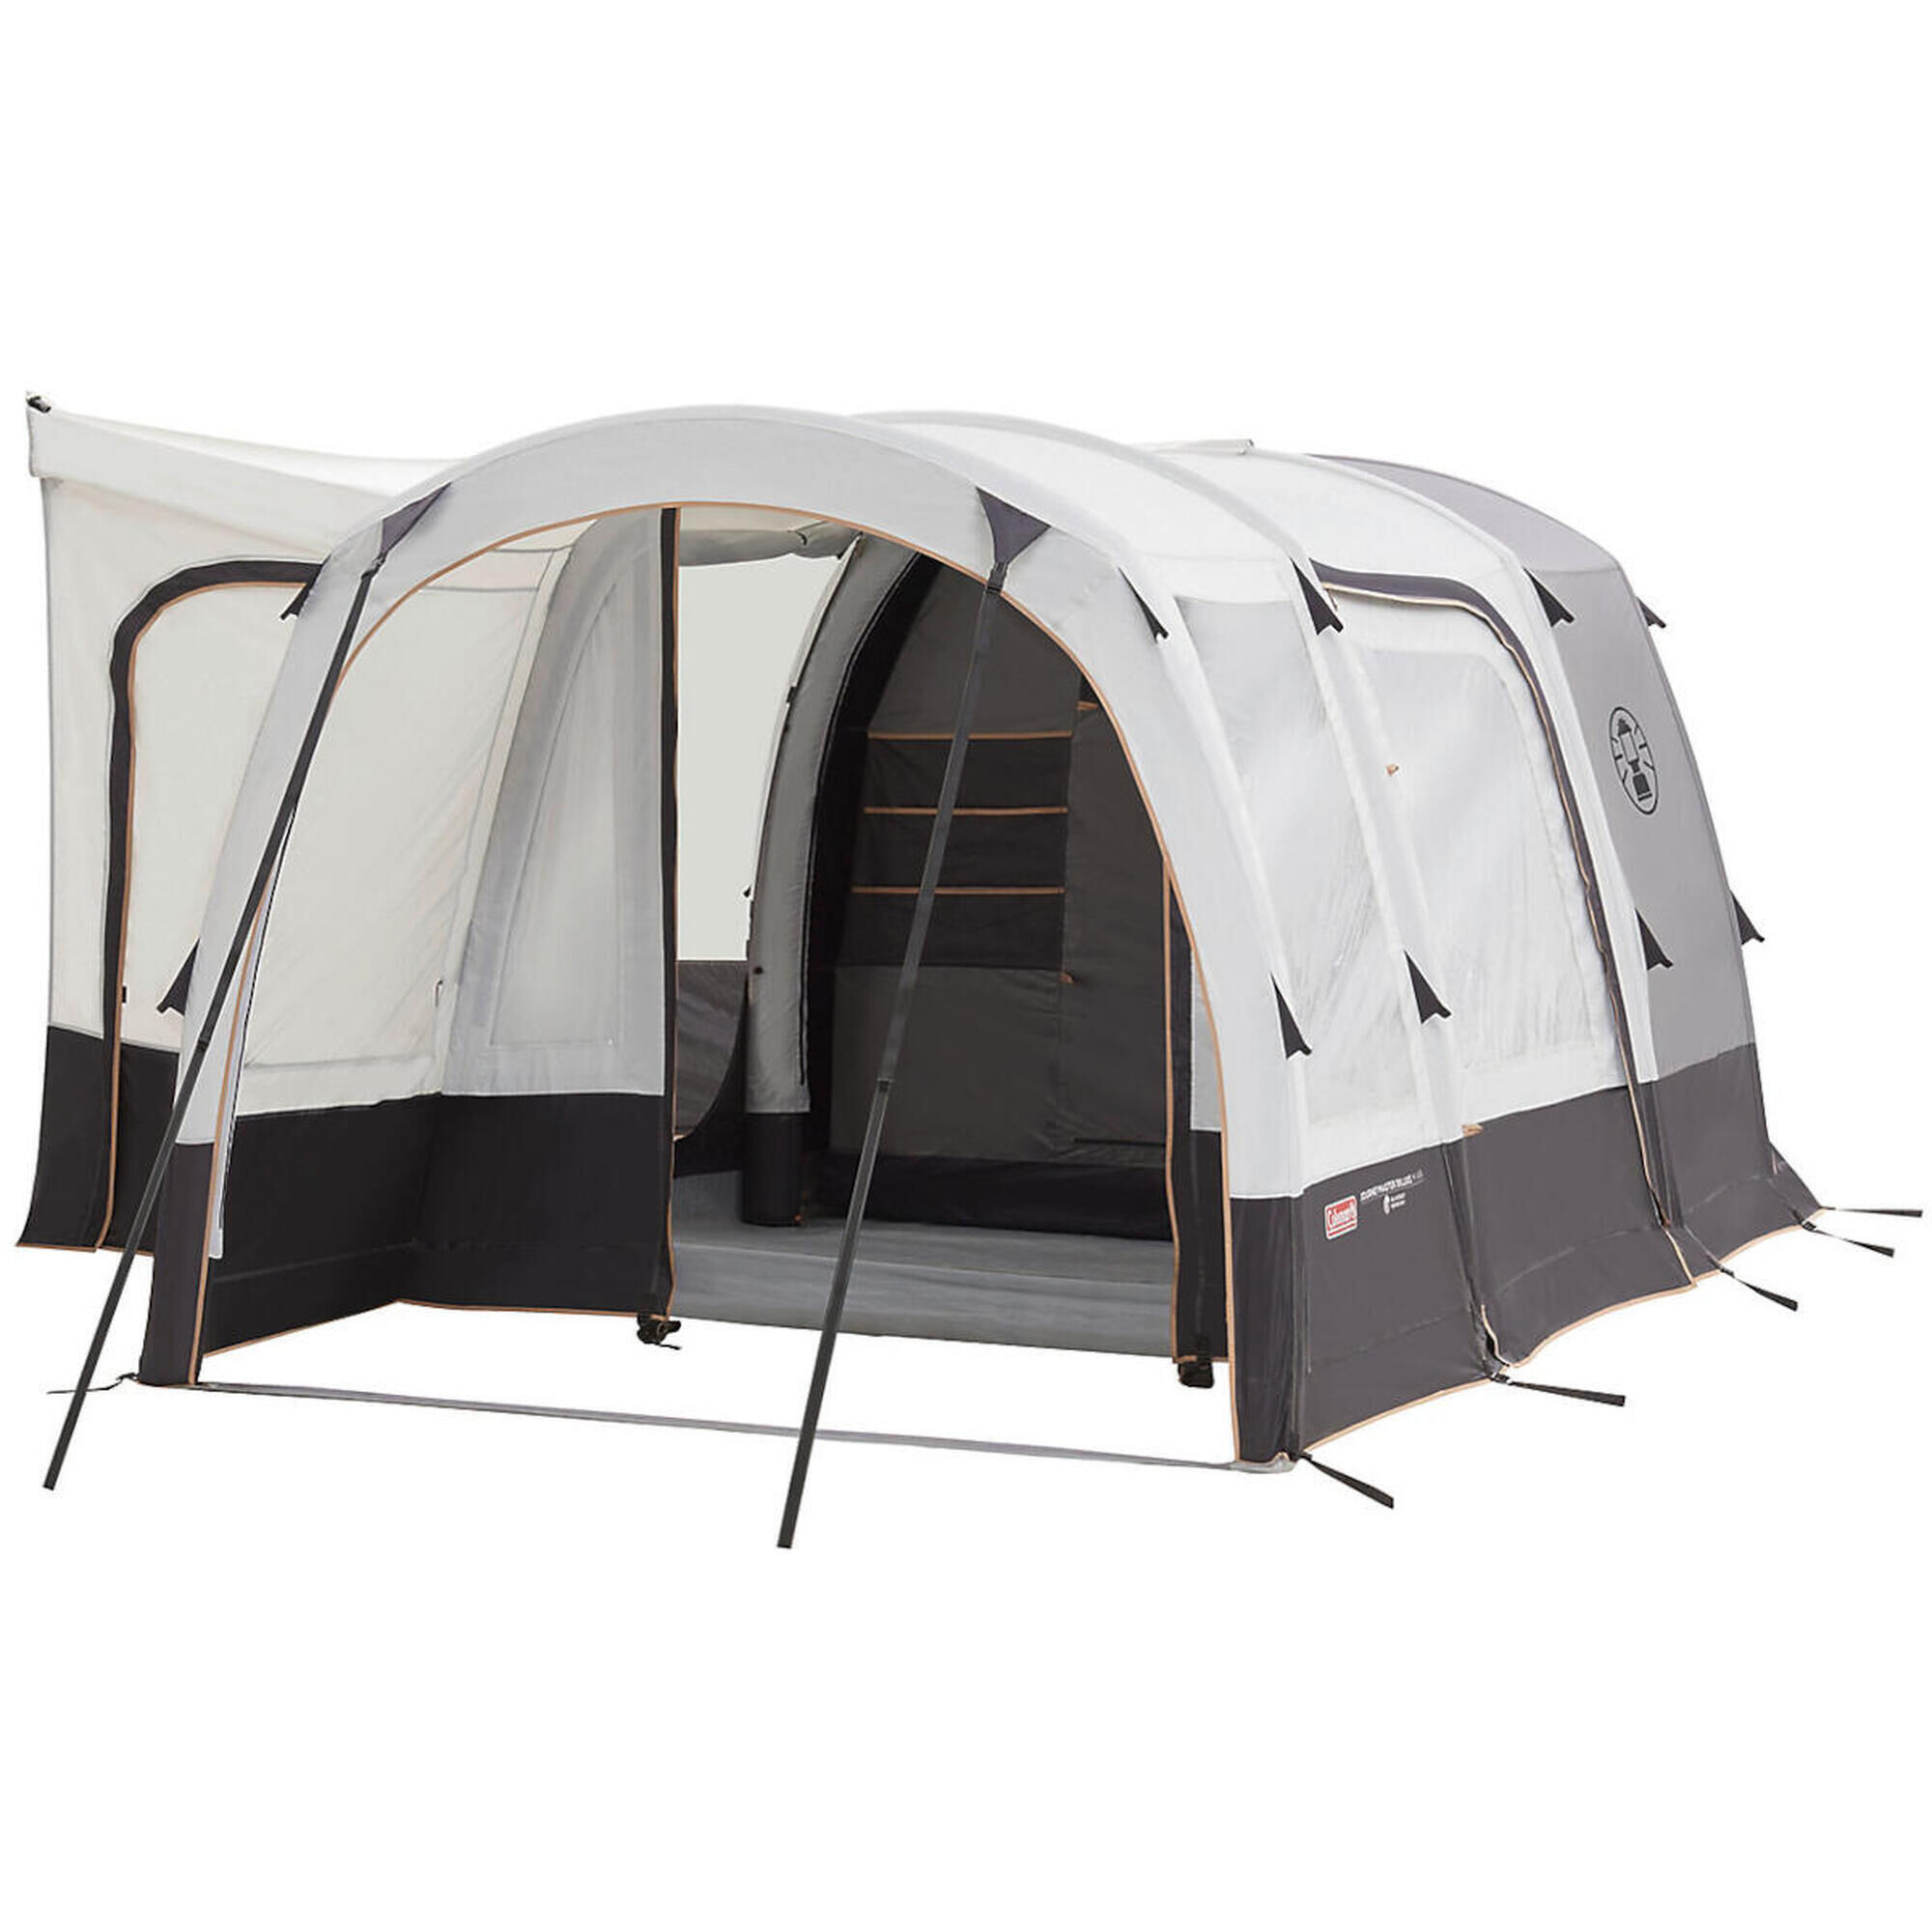 COLEMAN Factory Second Coleman Journeymaster Deluxe Air M BlackOut Drive Away Awning